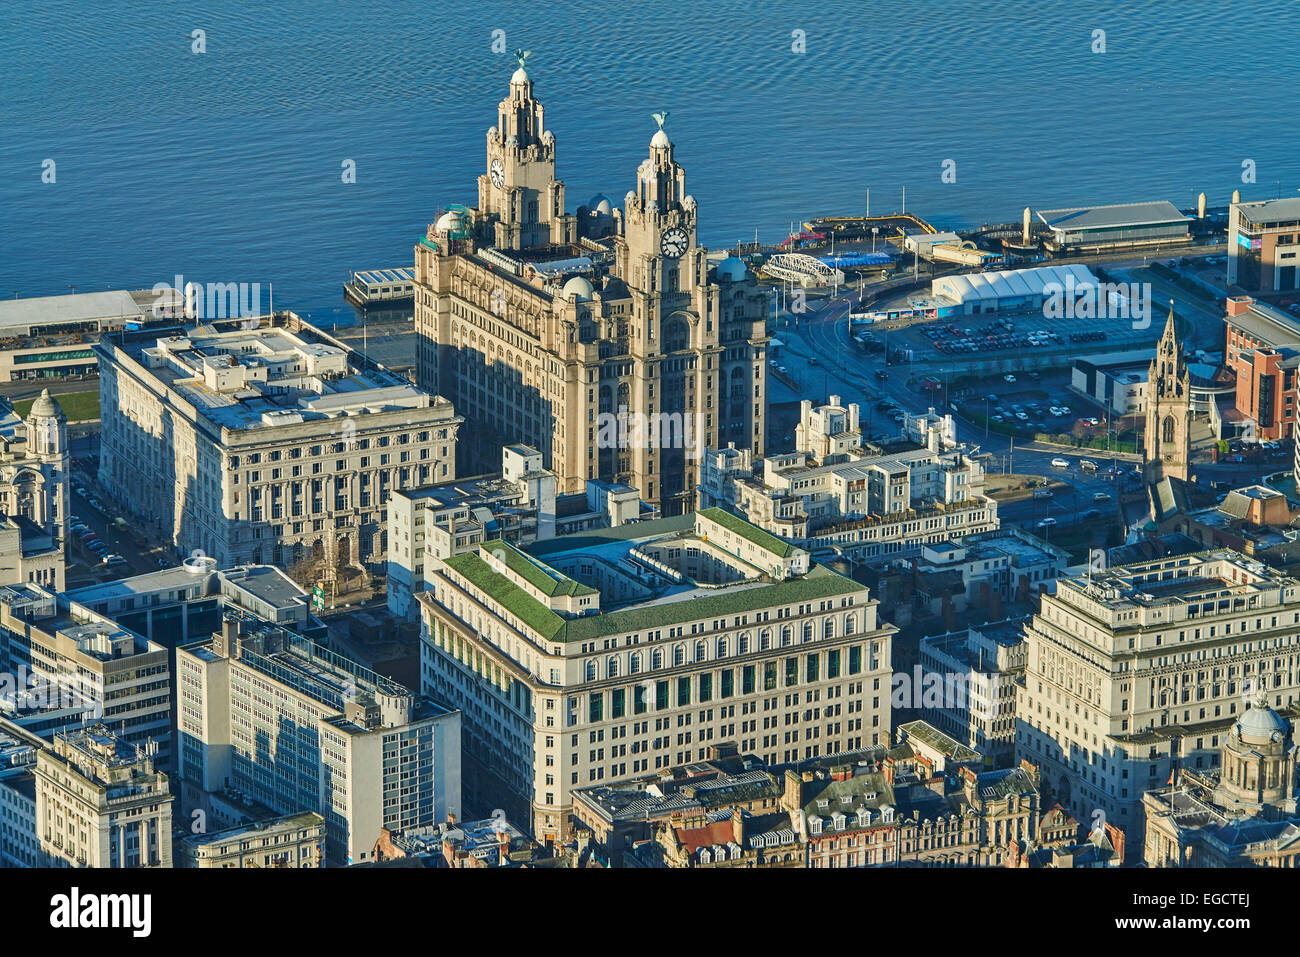 An aerial view of the Royal Liver Building in Liverpool. Completed in 1911 and former home of the Royal Liver Assurance Group Stock Photo